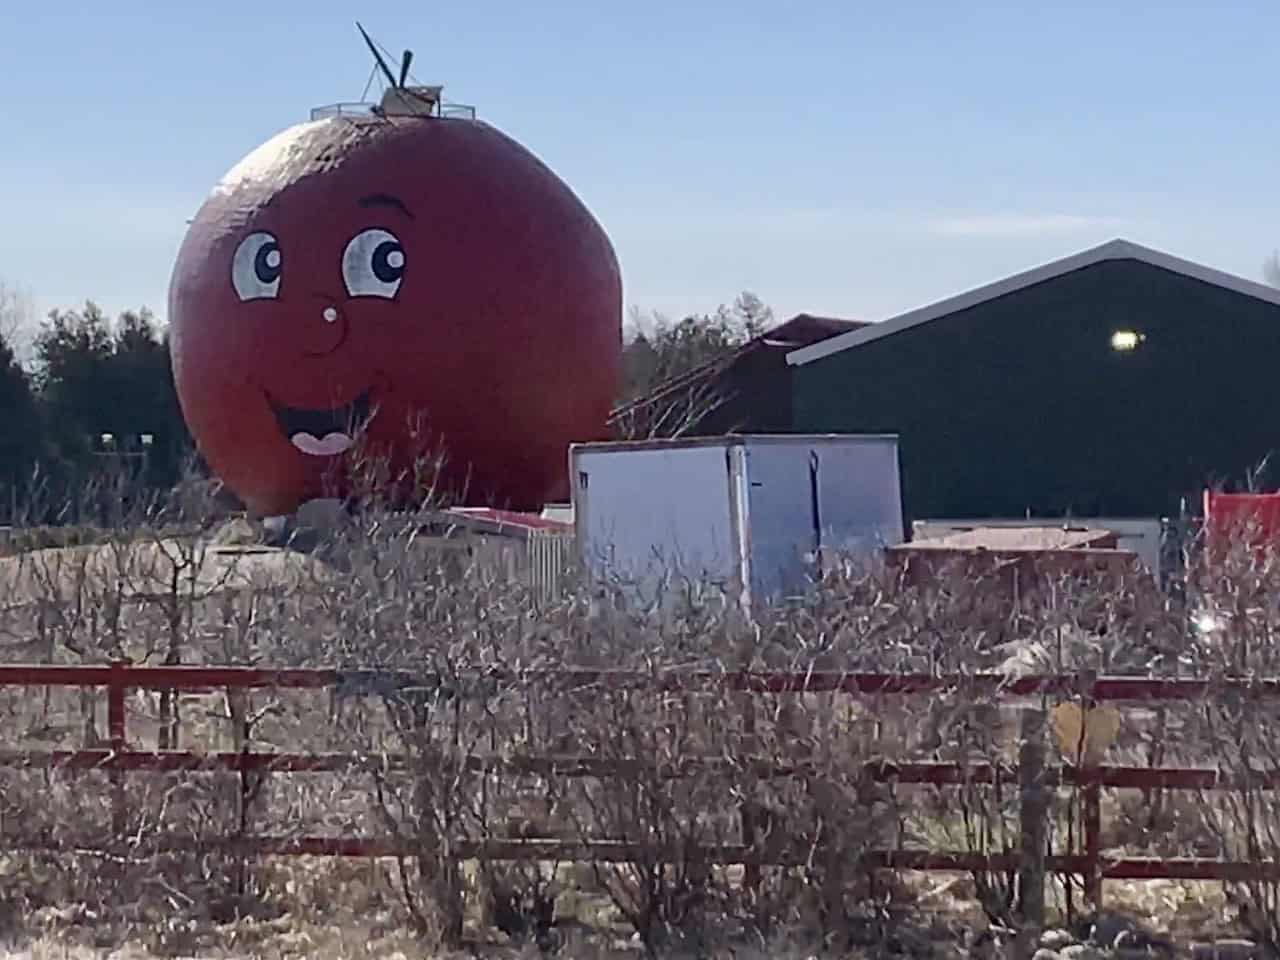 The Big Apple Colborne Ontario Canada  - The massive apple-shaped structure in Colborne, Ontario, Canada is visible from Highway 401. This iconic roadside attraction beckons travellers to pull off and visit The Big Apple.